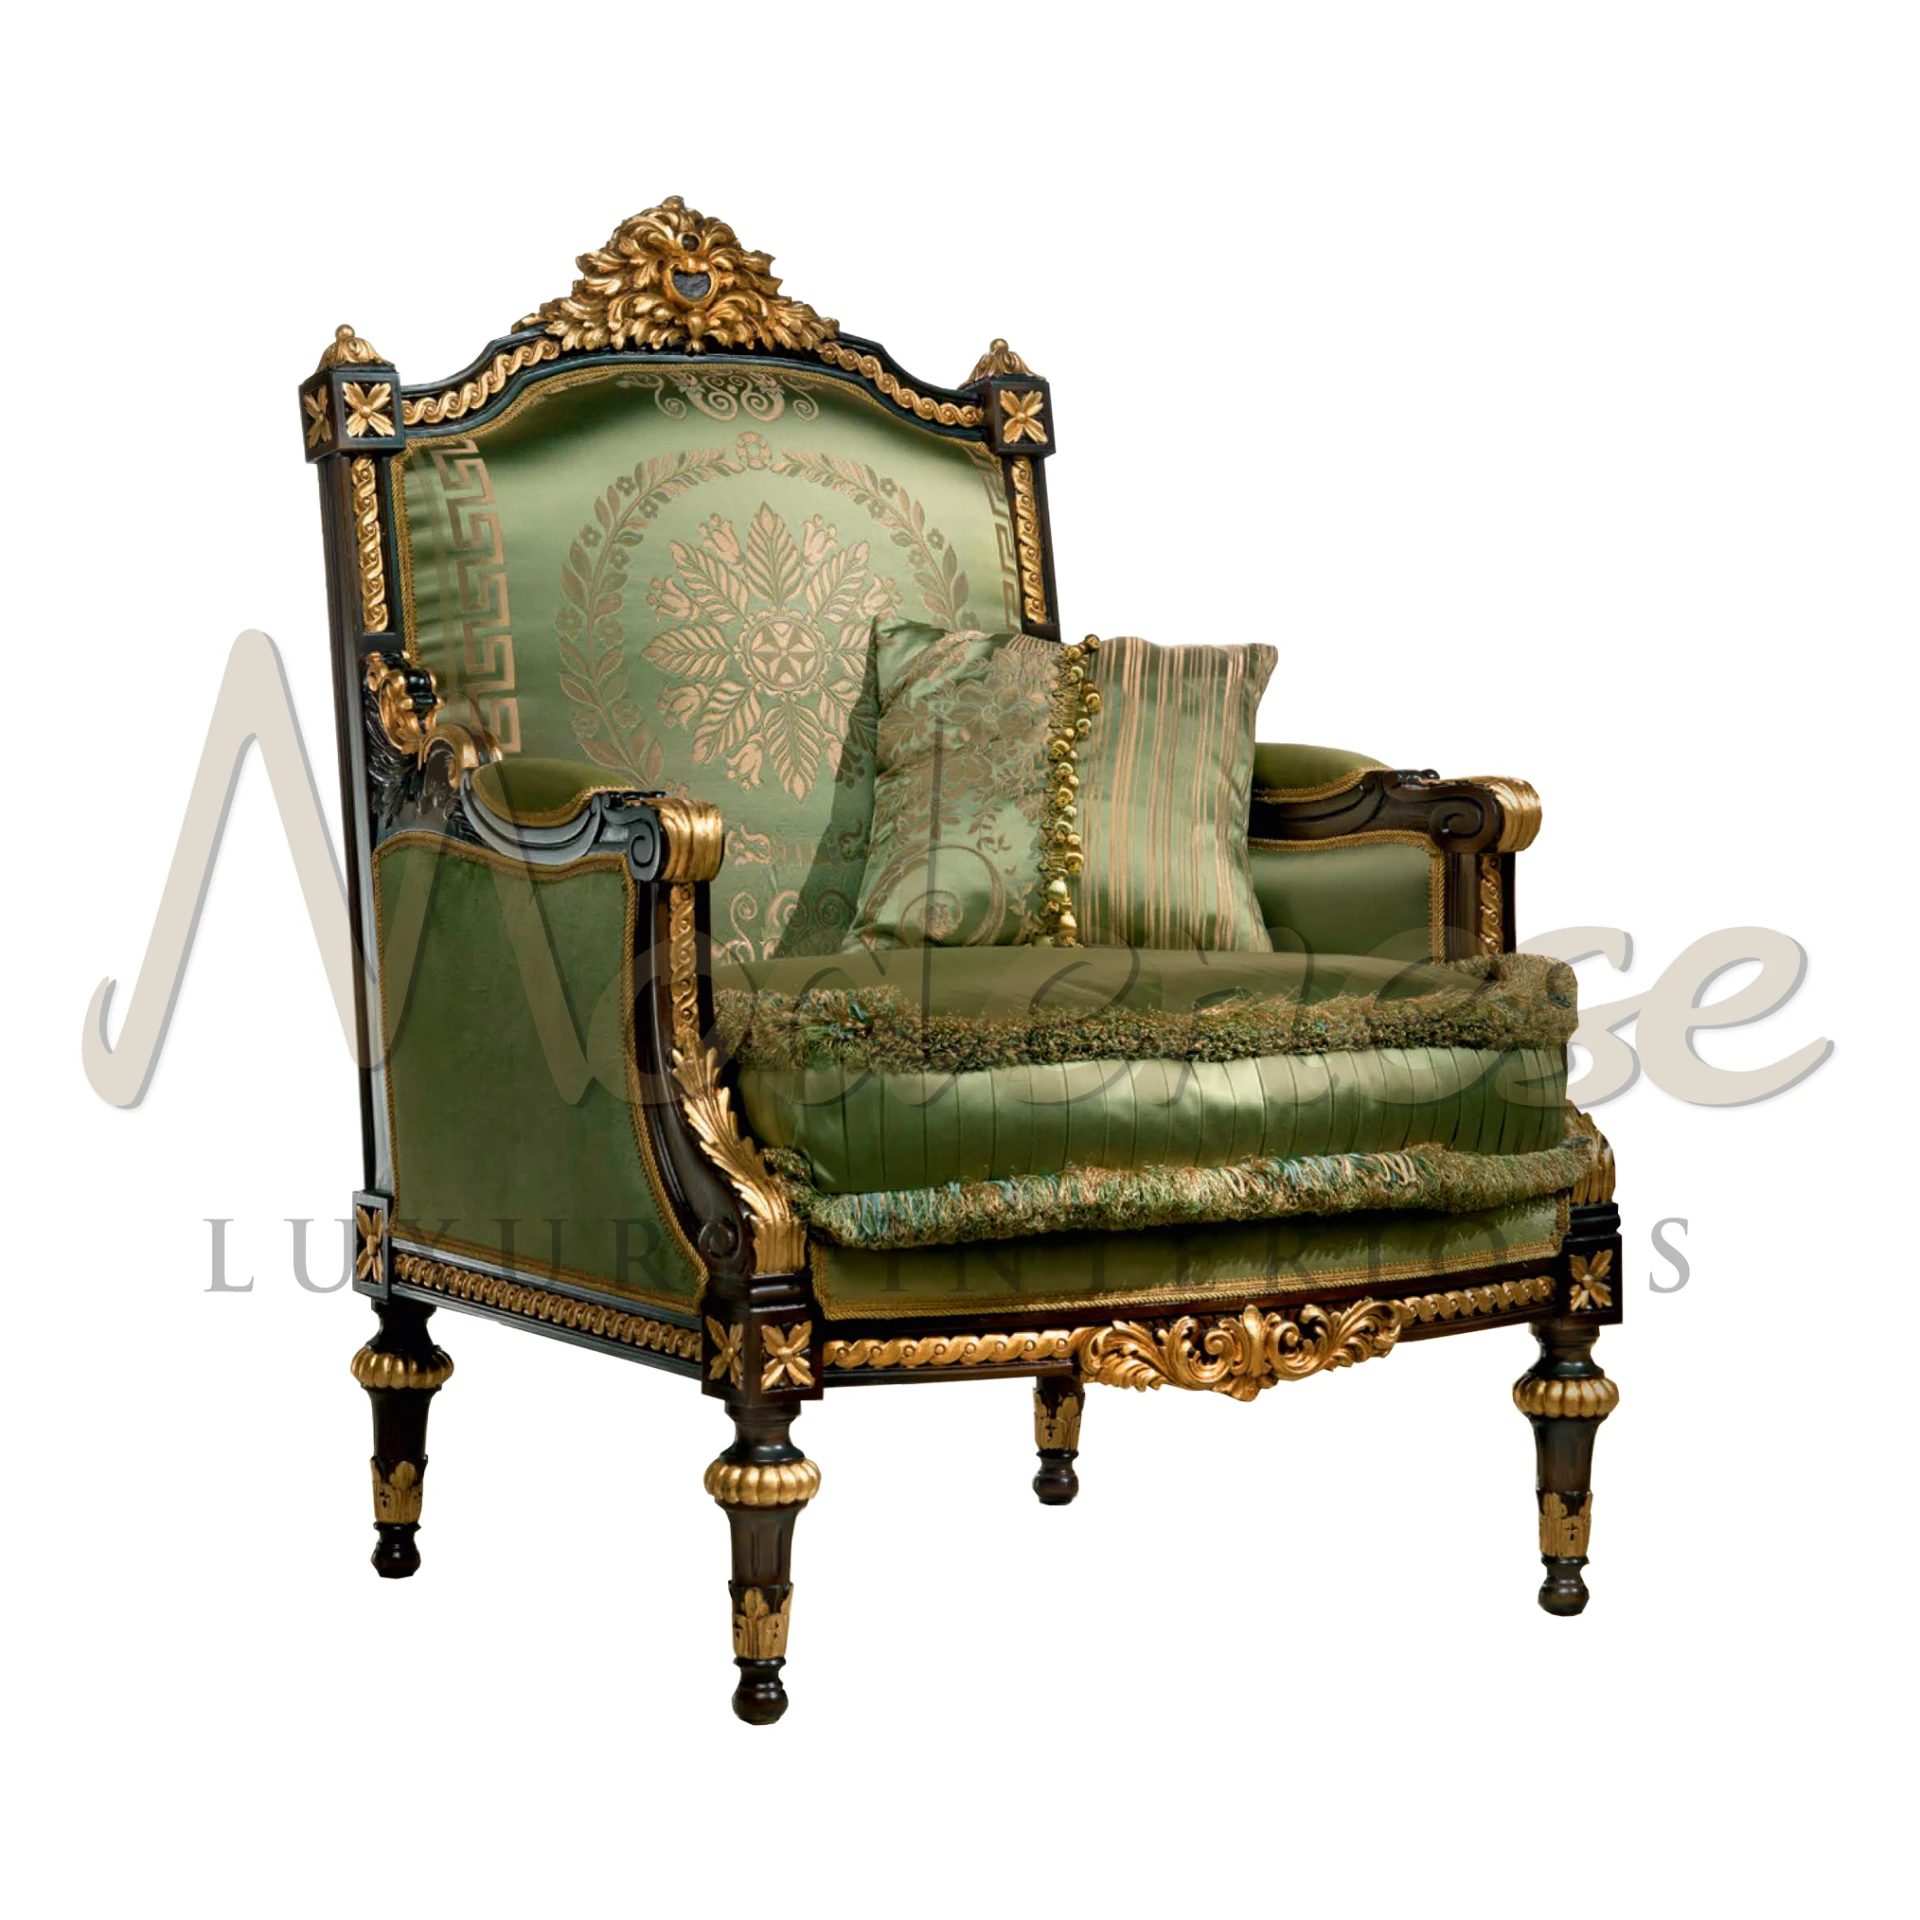 Ornate Victorian-style armchair with emerald green upholstery and golden accents on a carved dark wood frame.